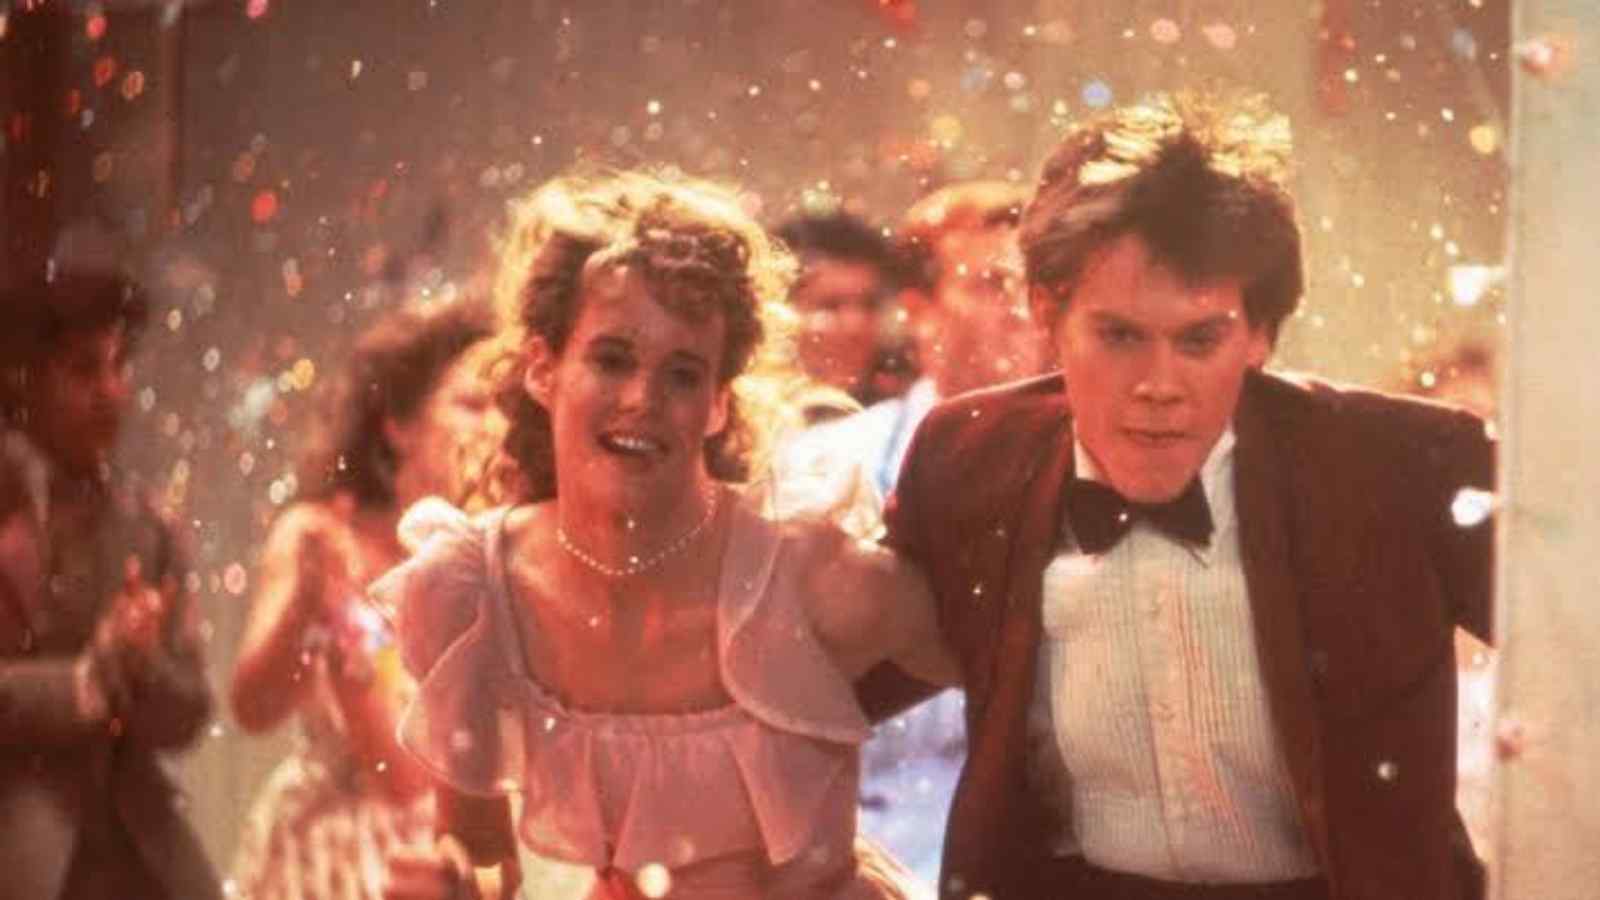 Footloose had a different ending planned 